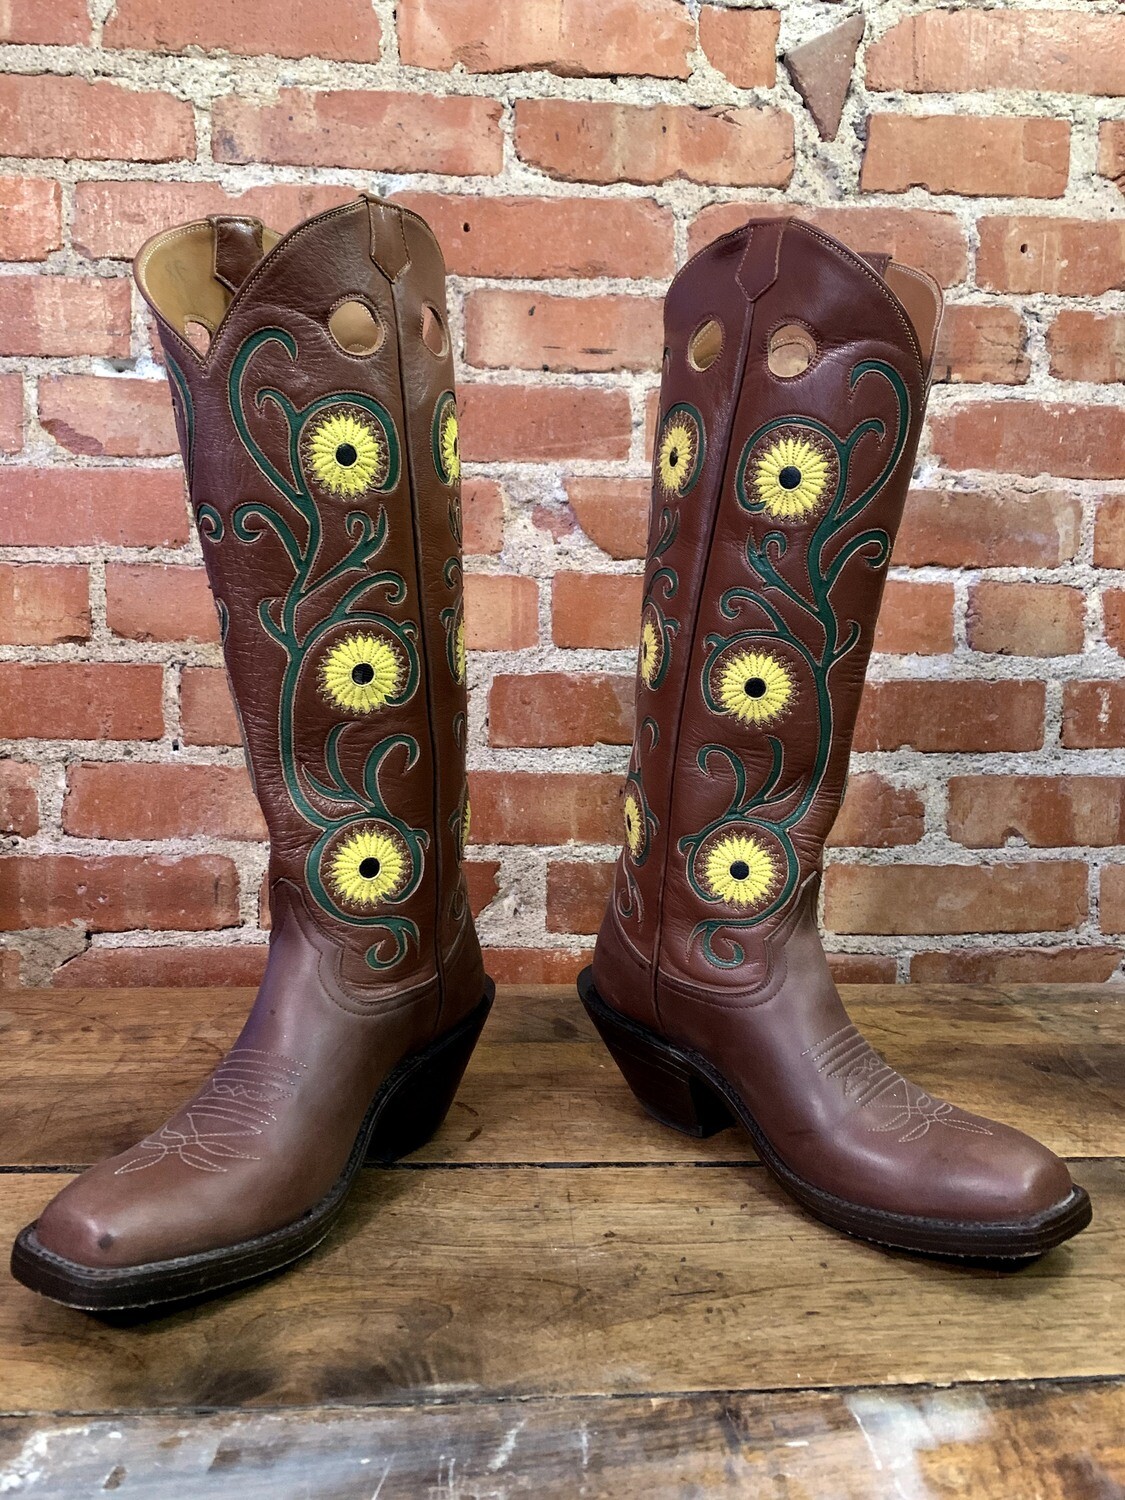 Sunny Delight Cowboy Boots